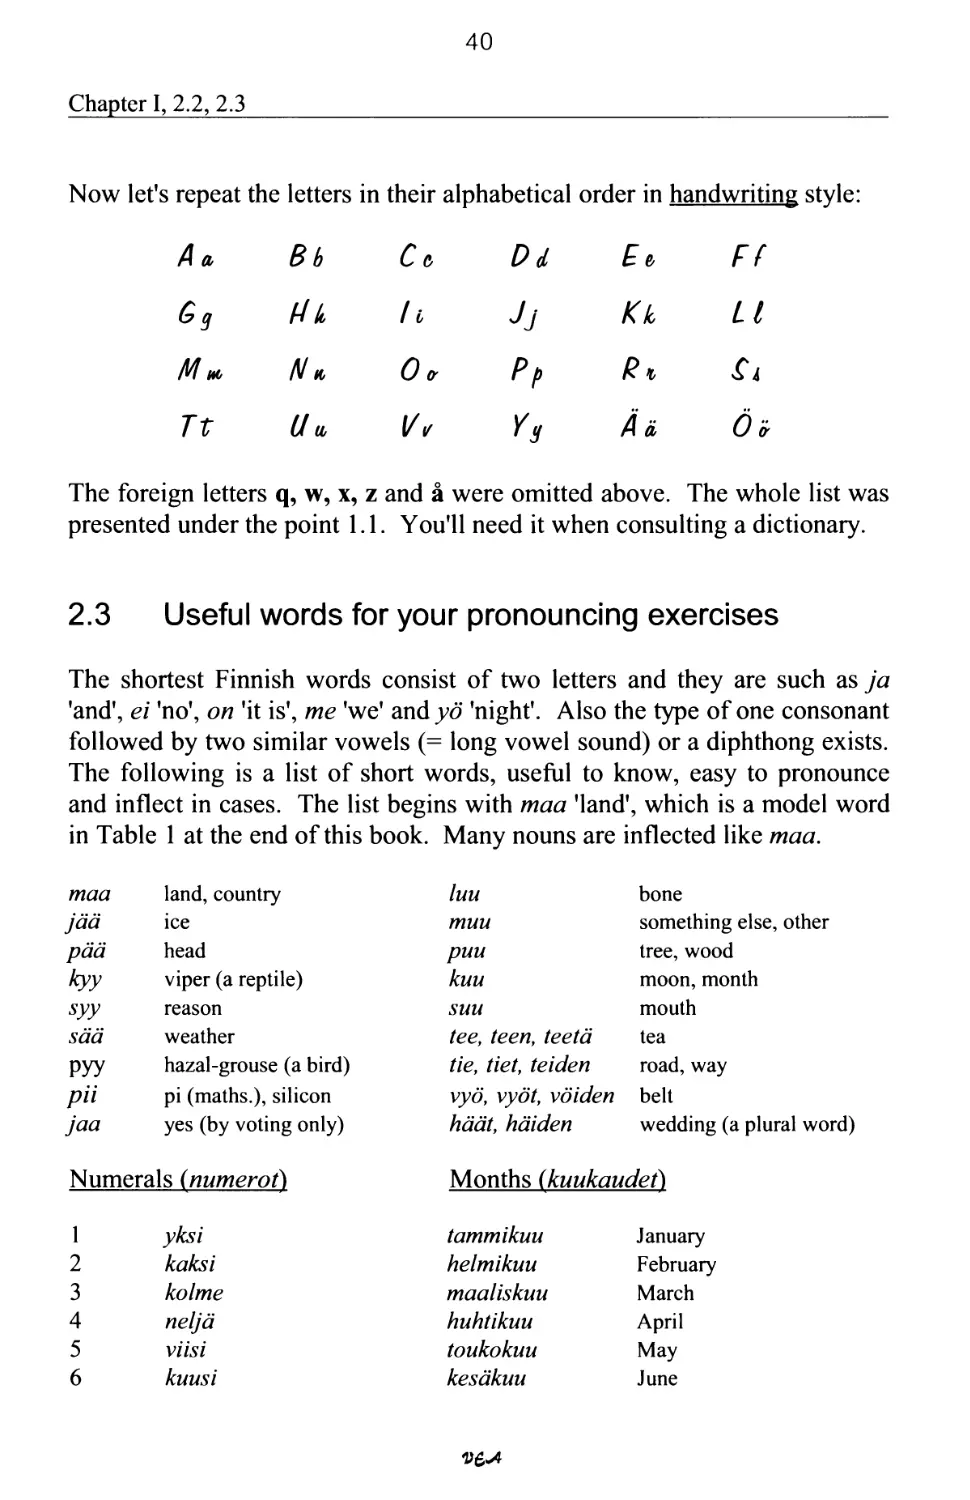 2.3 Useful words for your pronouncing exercises